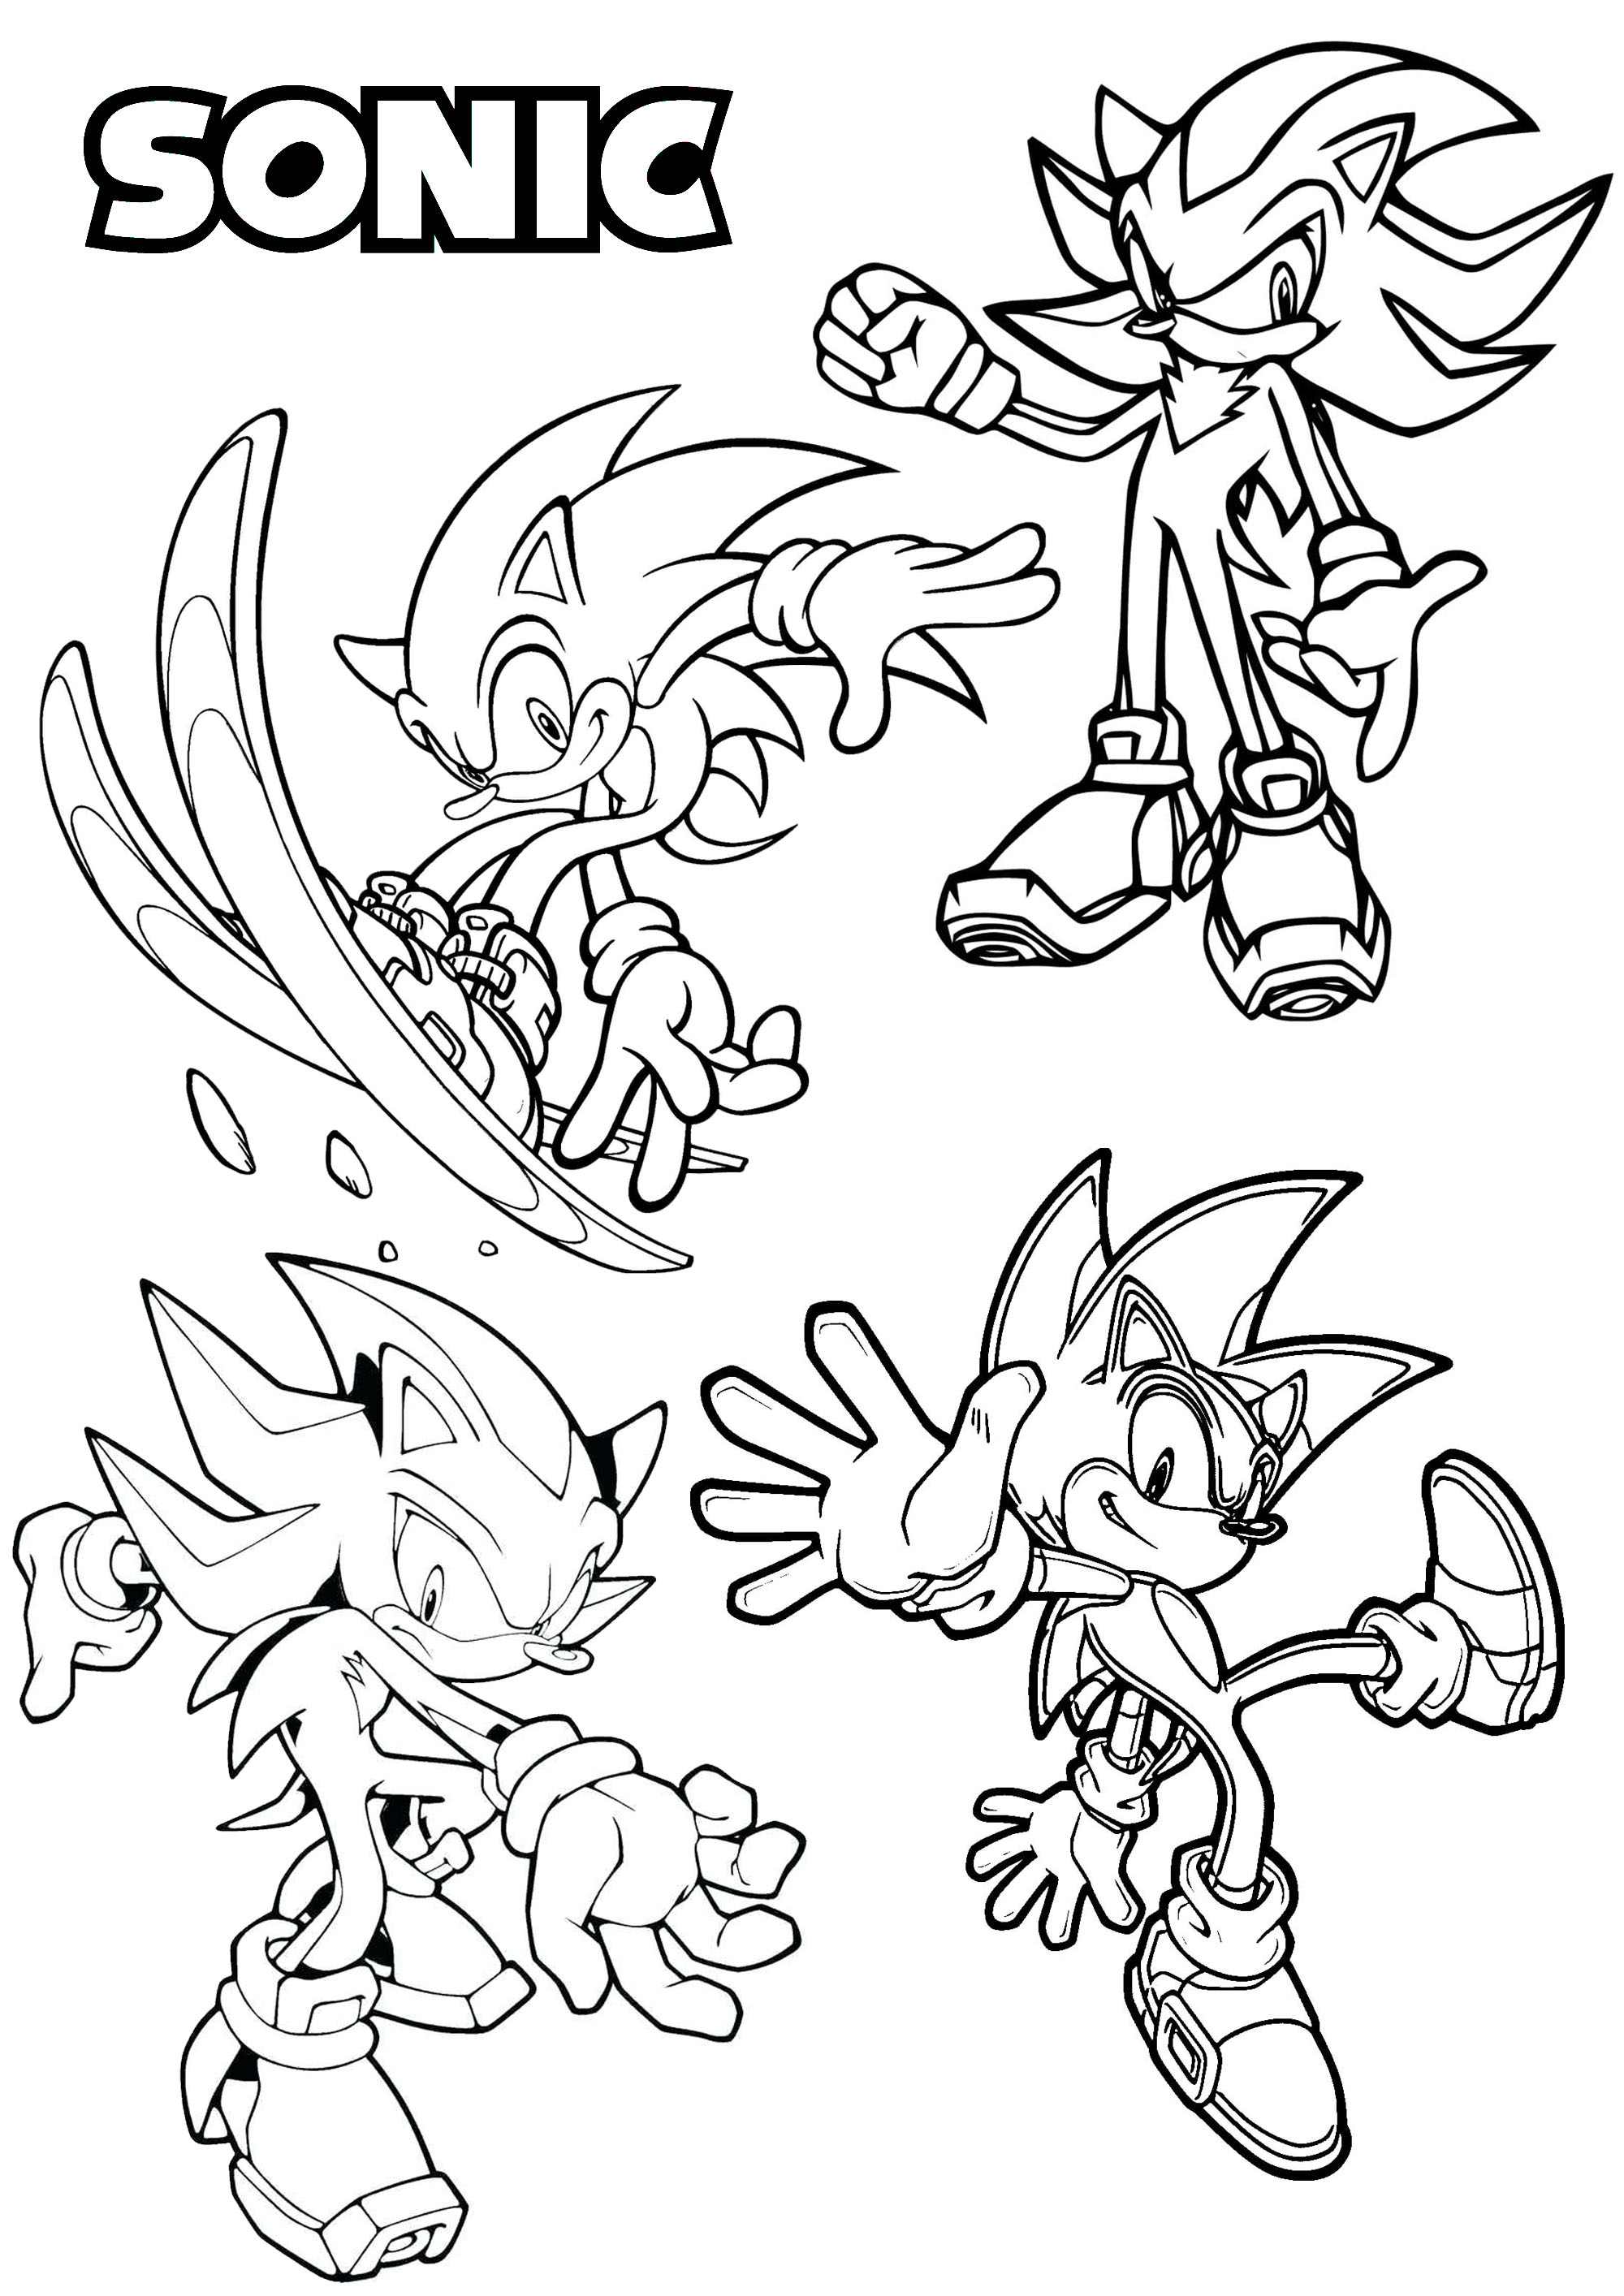 Four different versions of one of the most famous video games characters, created in the 90's : Sonic the Hedgehog